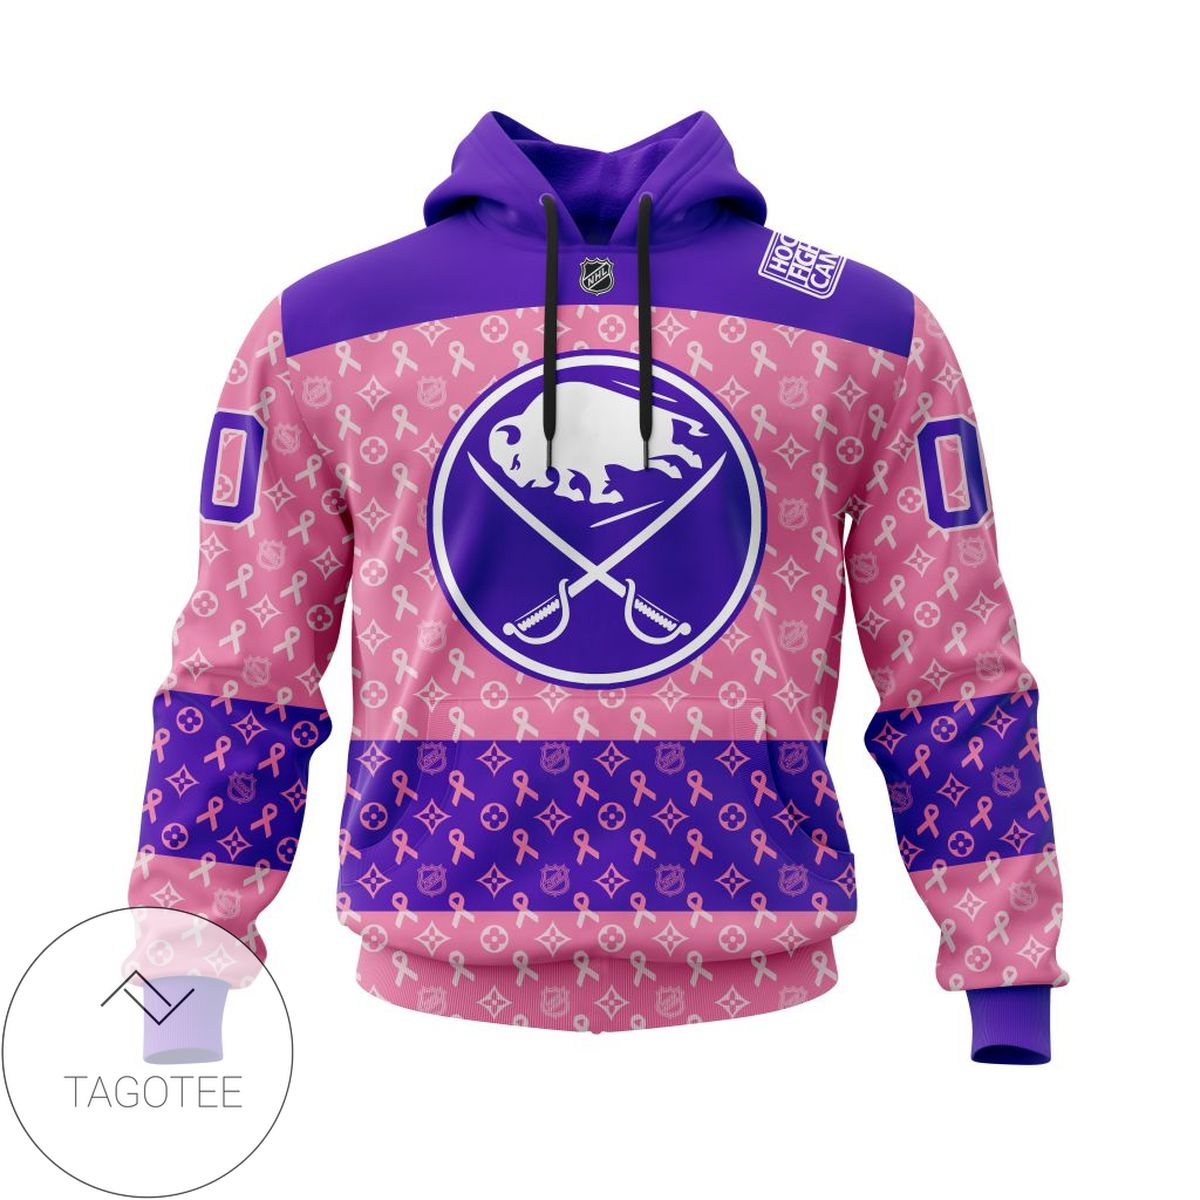 Personalized NHL Buffalo SabresPink Ribbon Fights Cancer Jersey